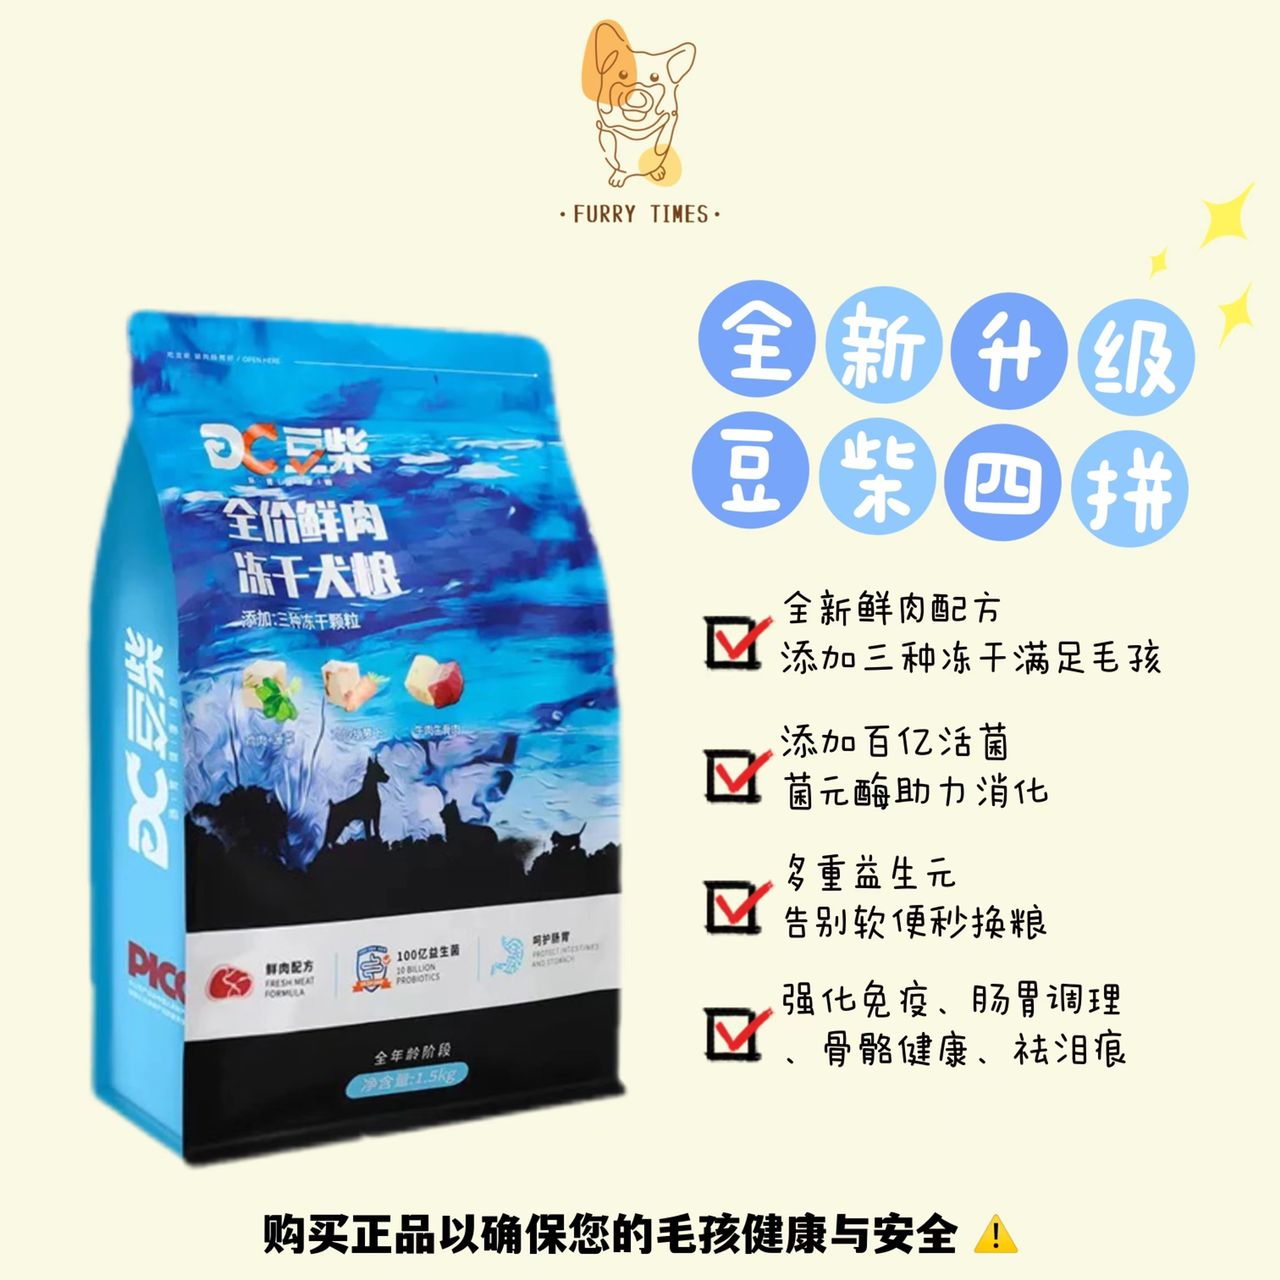 (READY STOCK) Docile Freeze Dried Complete Dog Food 豆柴冻干无谷鲜肉果蔬四拼狗粮 1.5KG